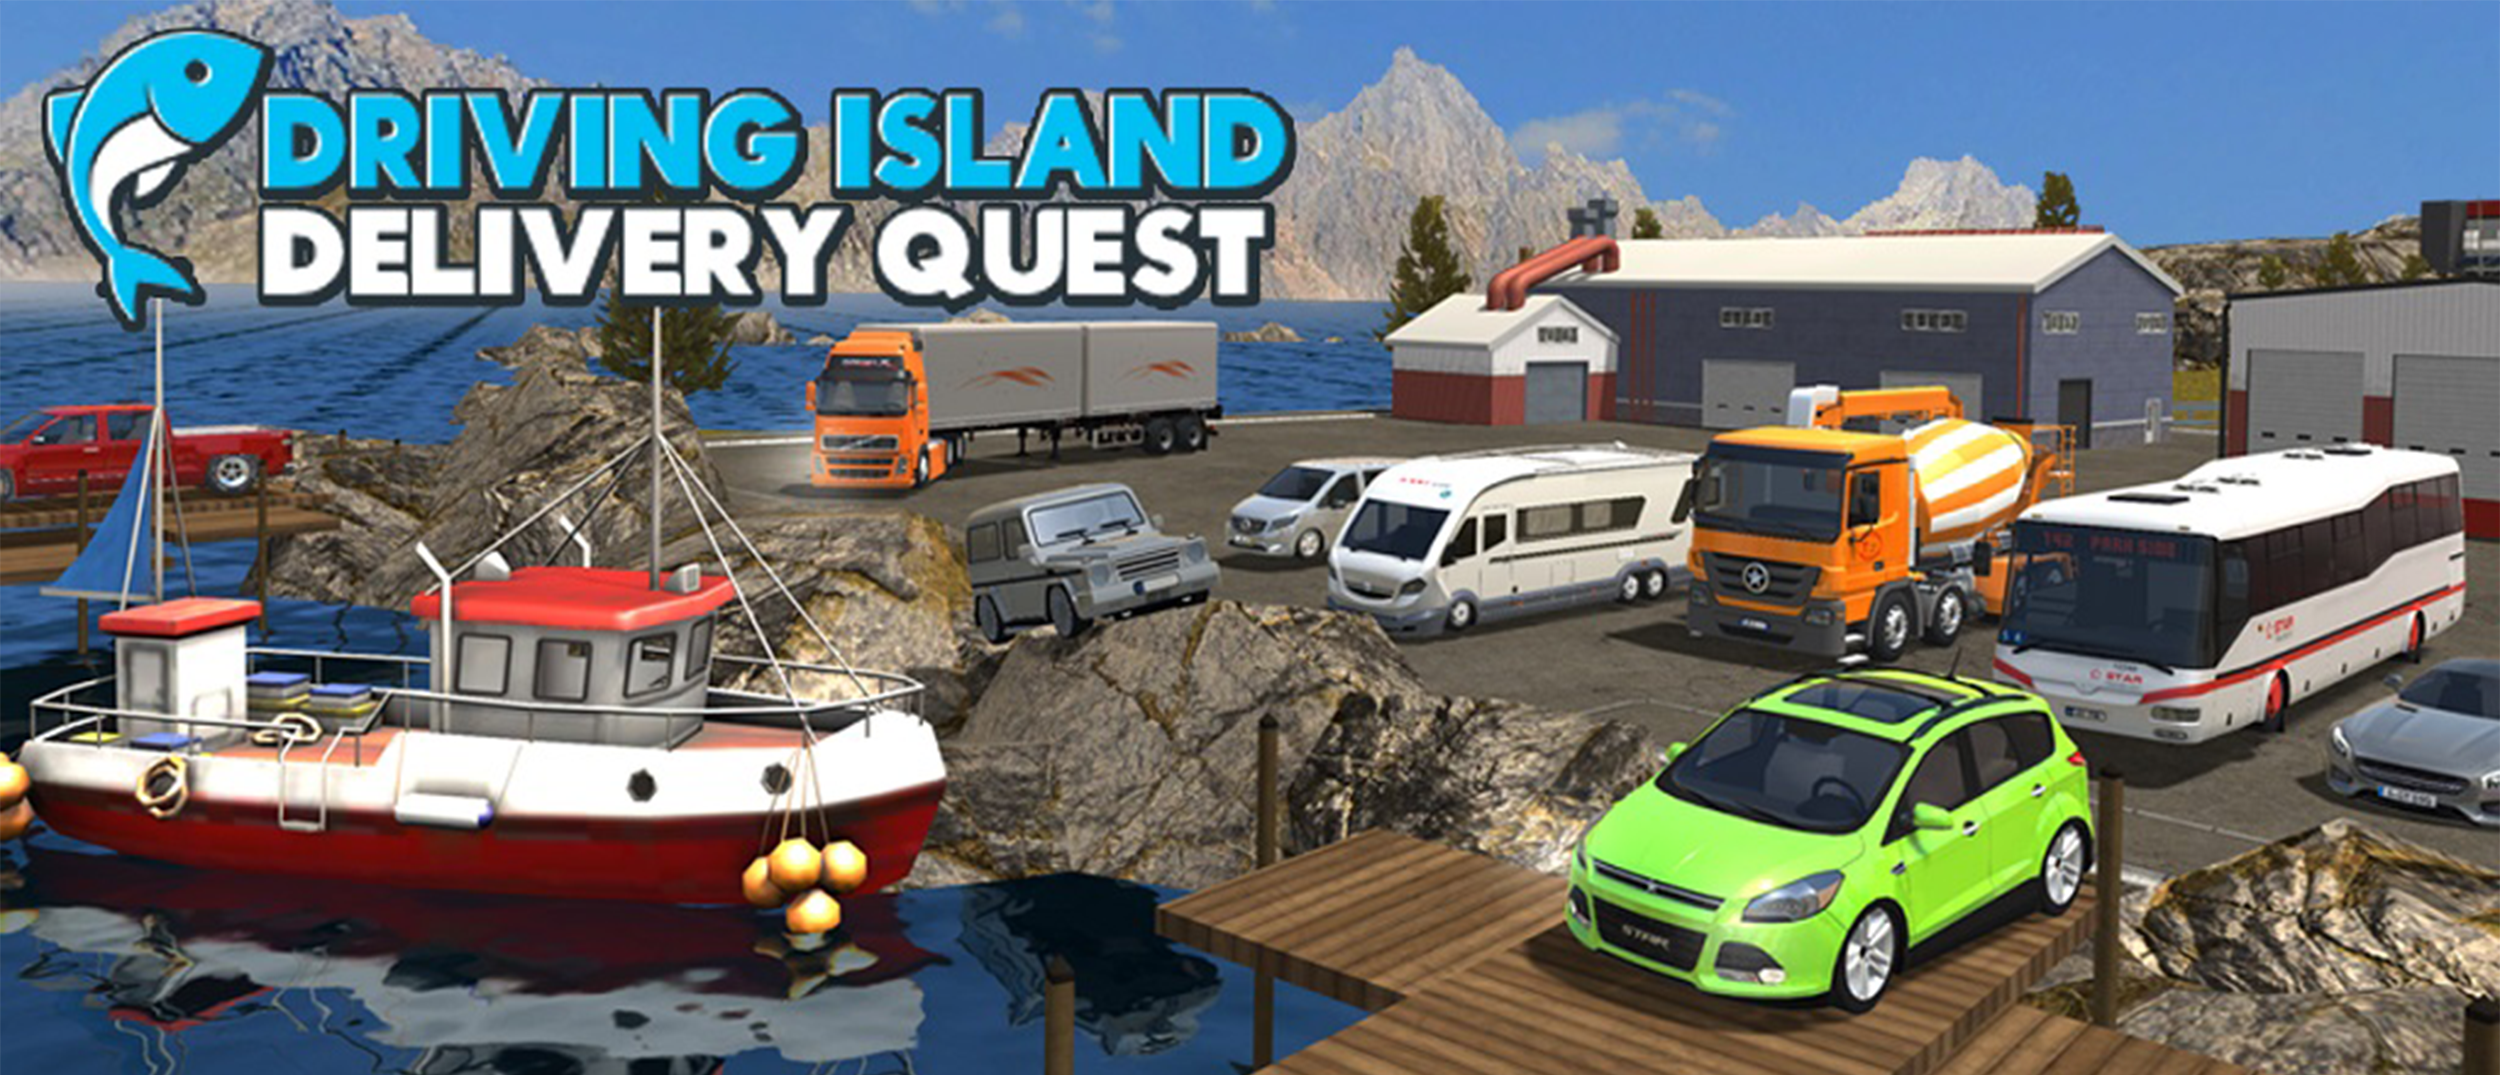 Driving Island - Delivery Quest